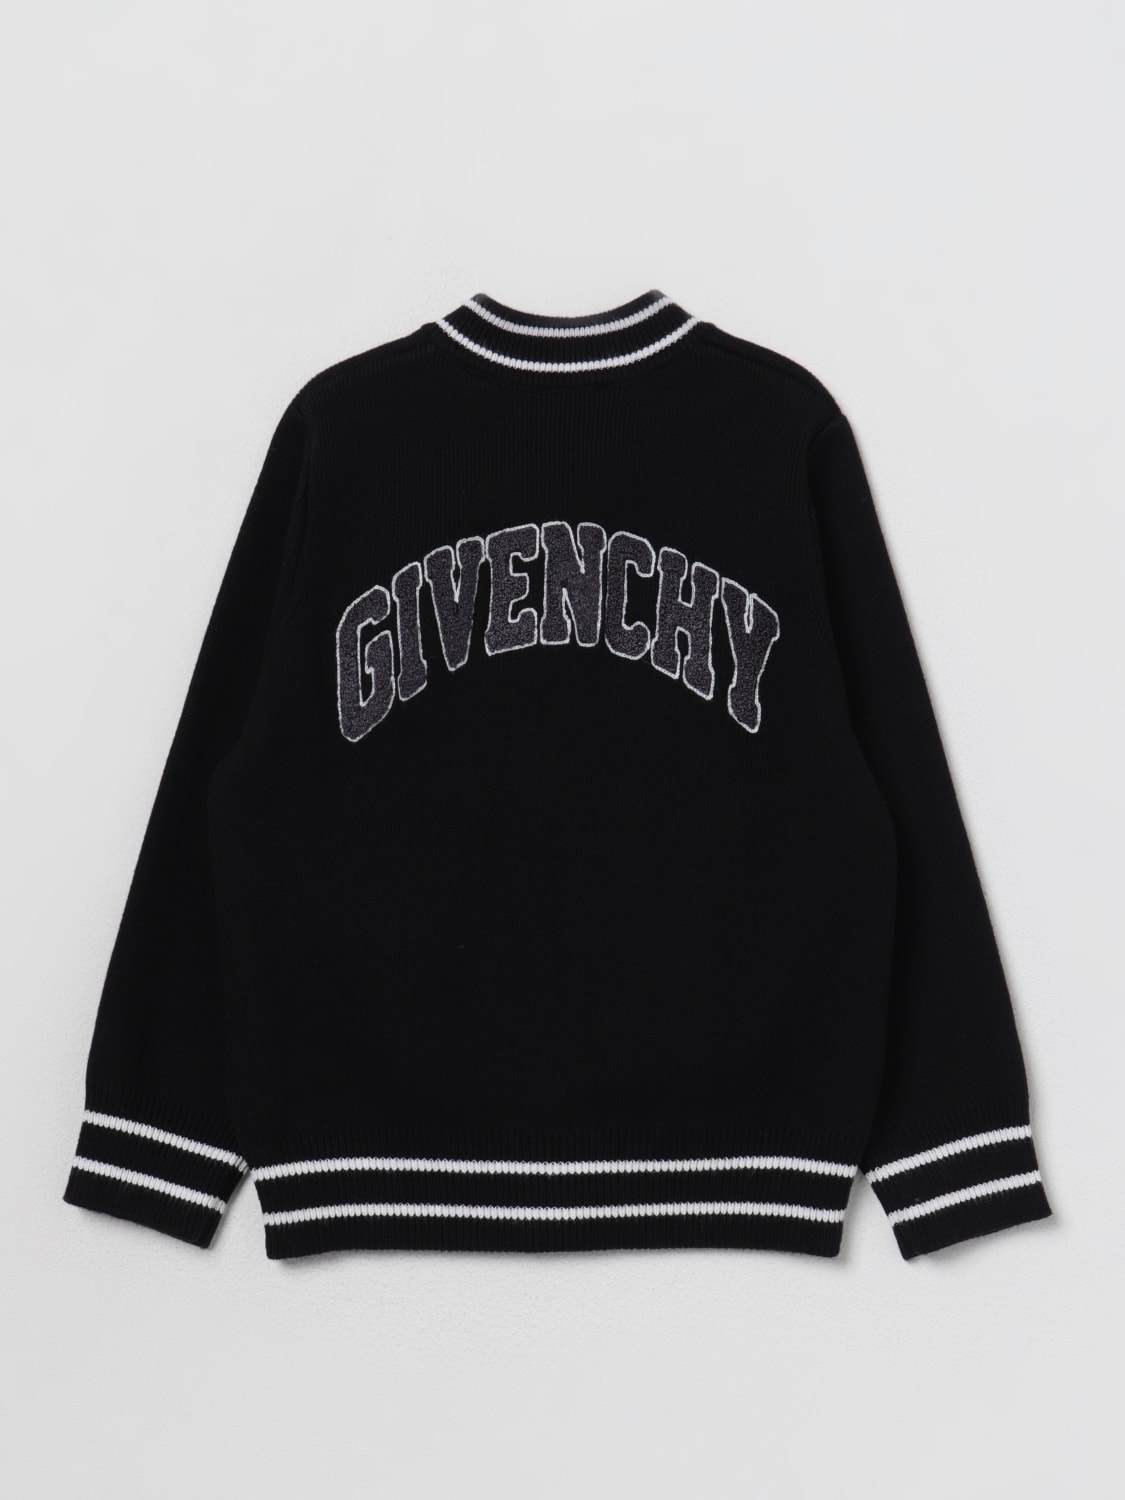 GIVENCHY: sweater for boys - Black  Givenchy sweater H25492 online at